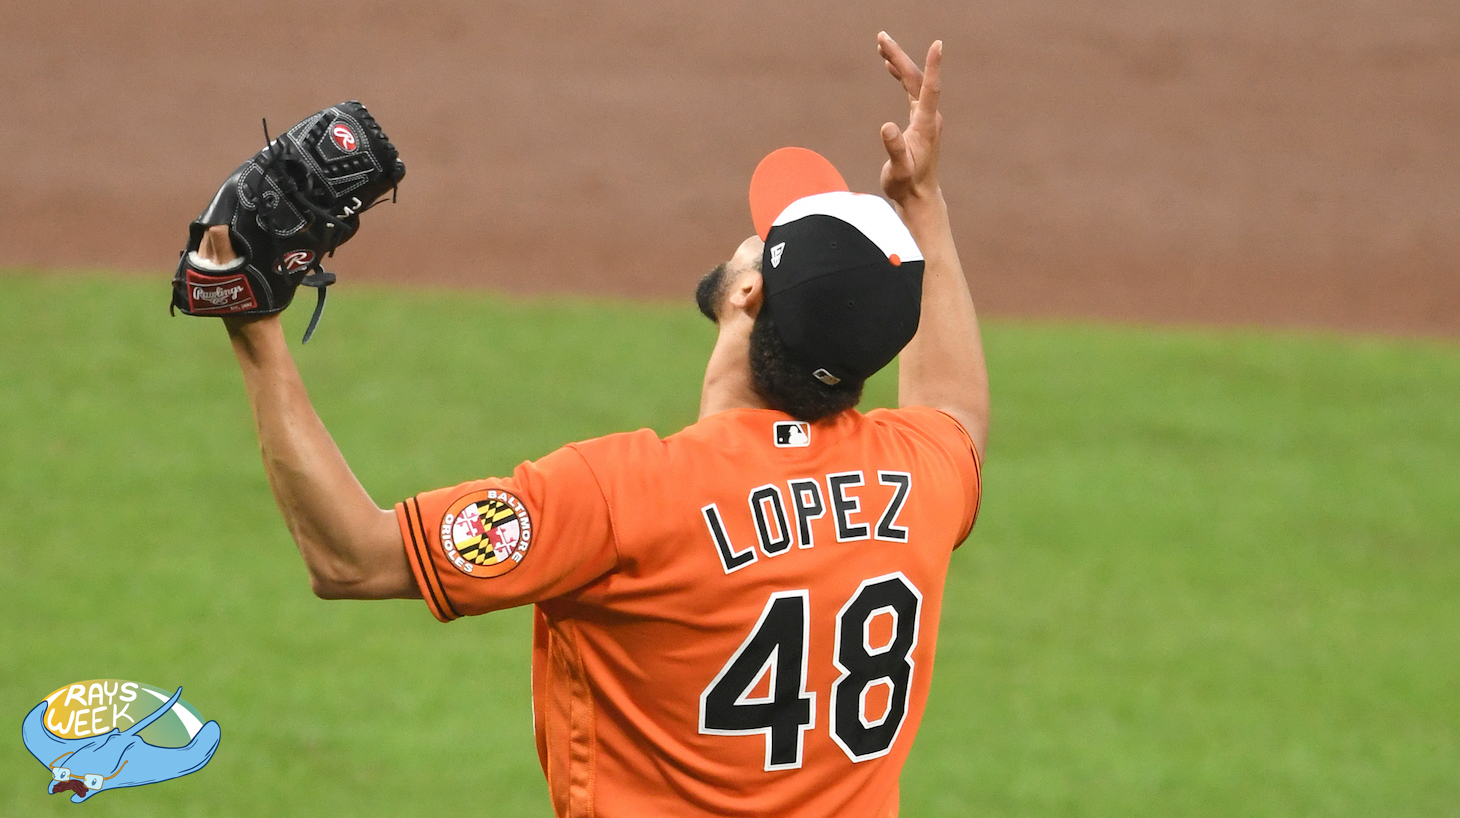 BALTIMORE, MD - JULY 09: Jorge Lopez #48 of the Baltimore Orioles celebrates a win after a baseball game against the Los Angeles Angels at Oriole Park at Camden Yards on July 9, 2022 in Baltimore, Maryland. (Photo by Mitchell Layton/Getty Images)